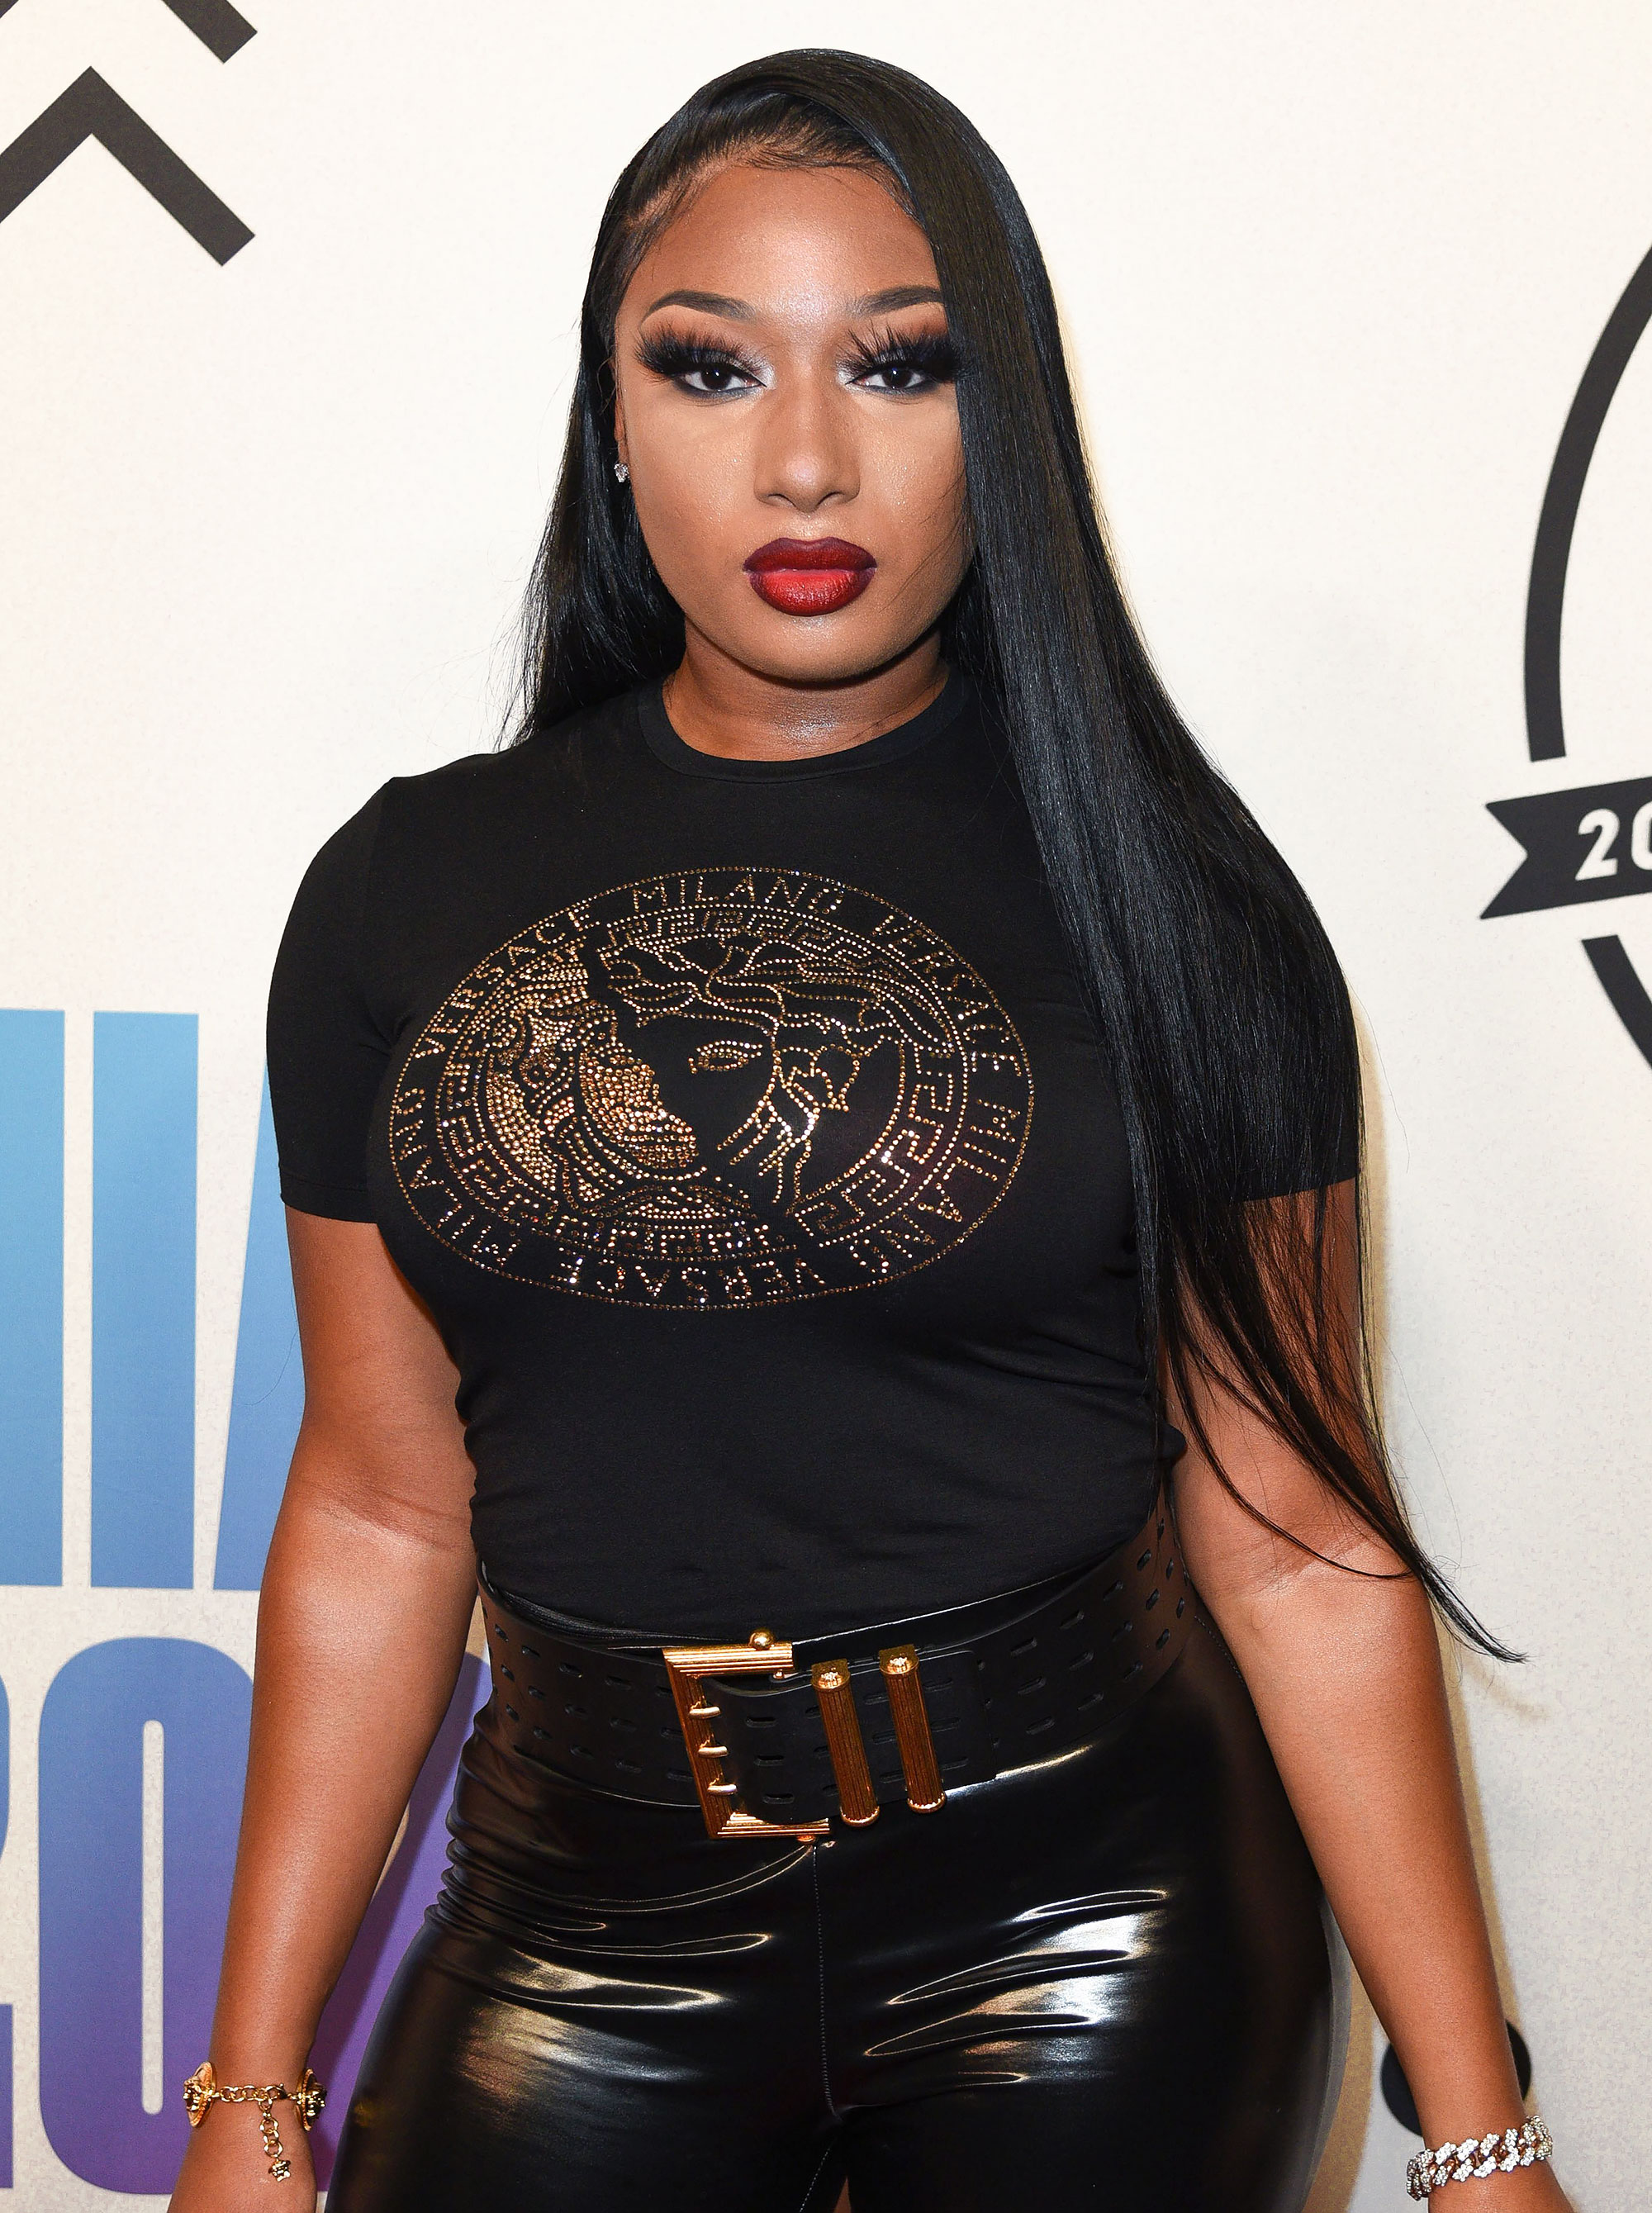 VMAs 2020: Megan Thee Stallion Makes Appearance After Shooting